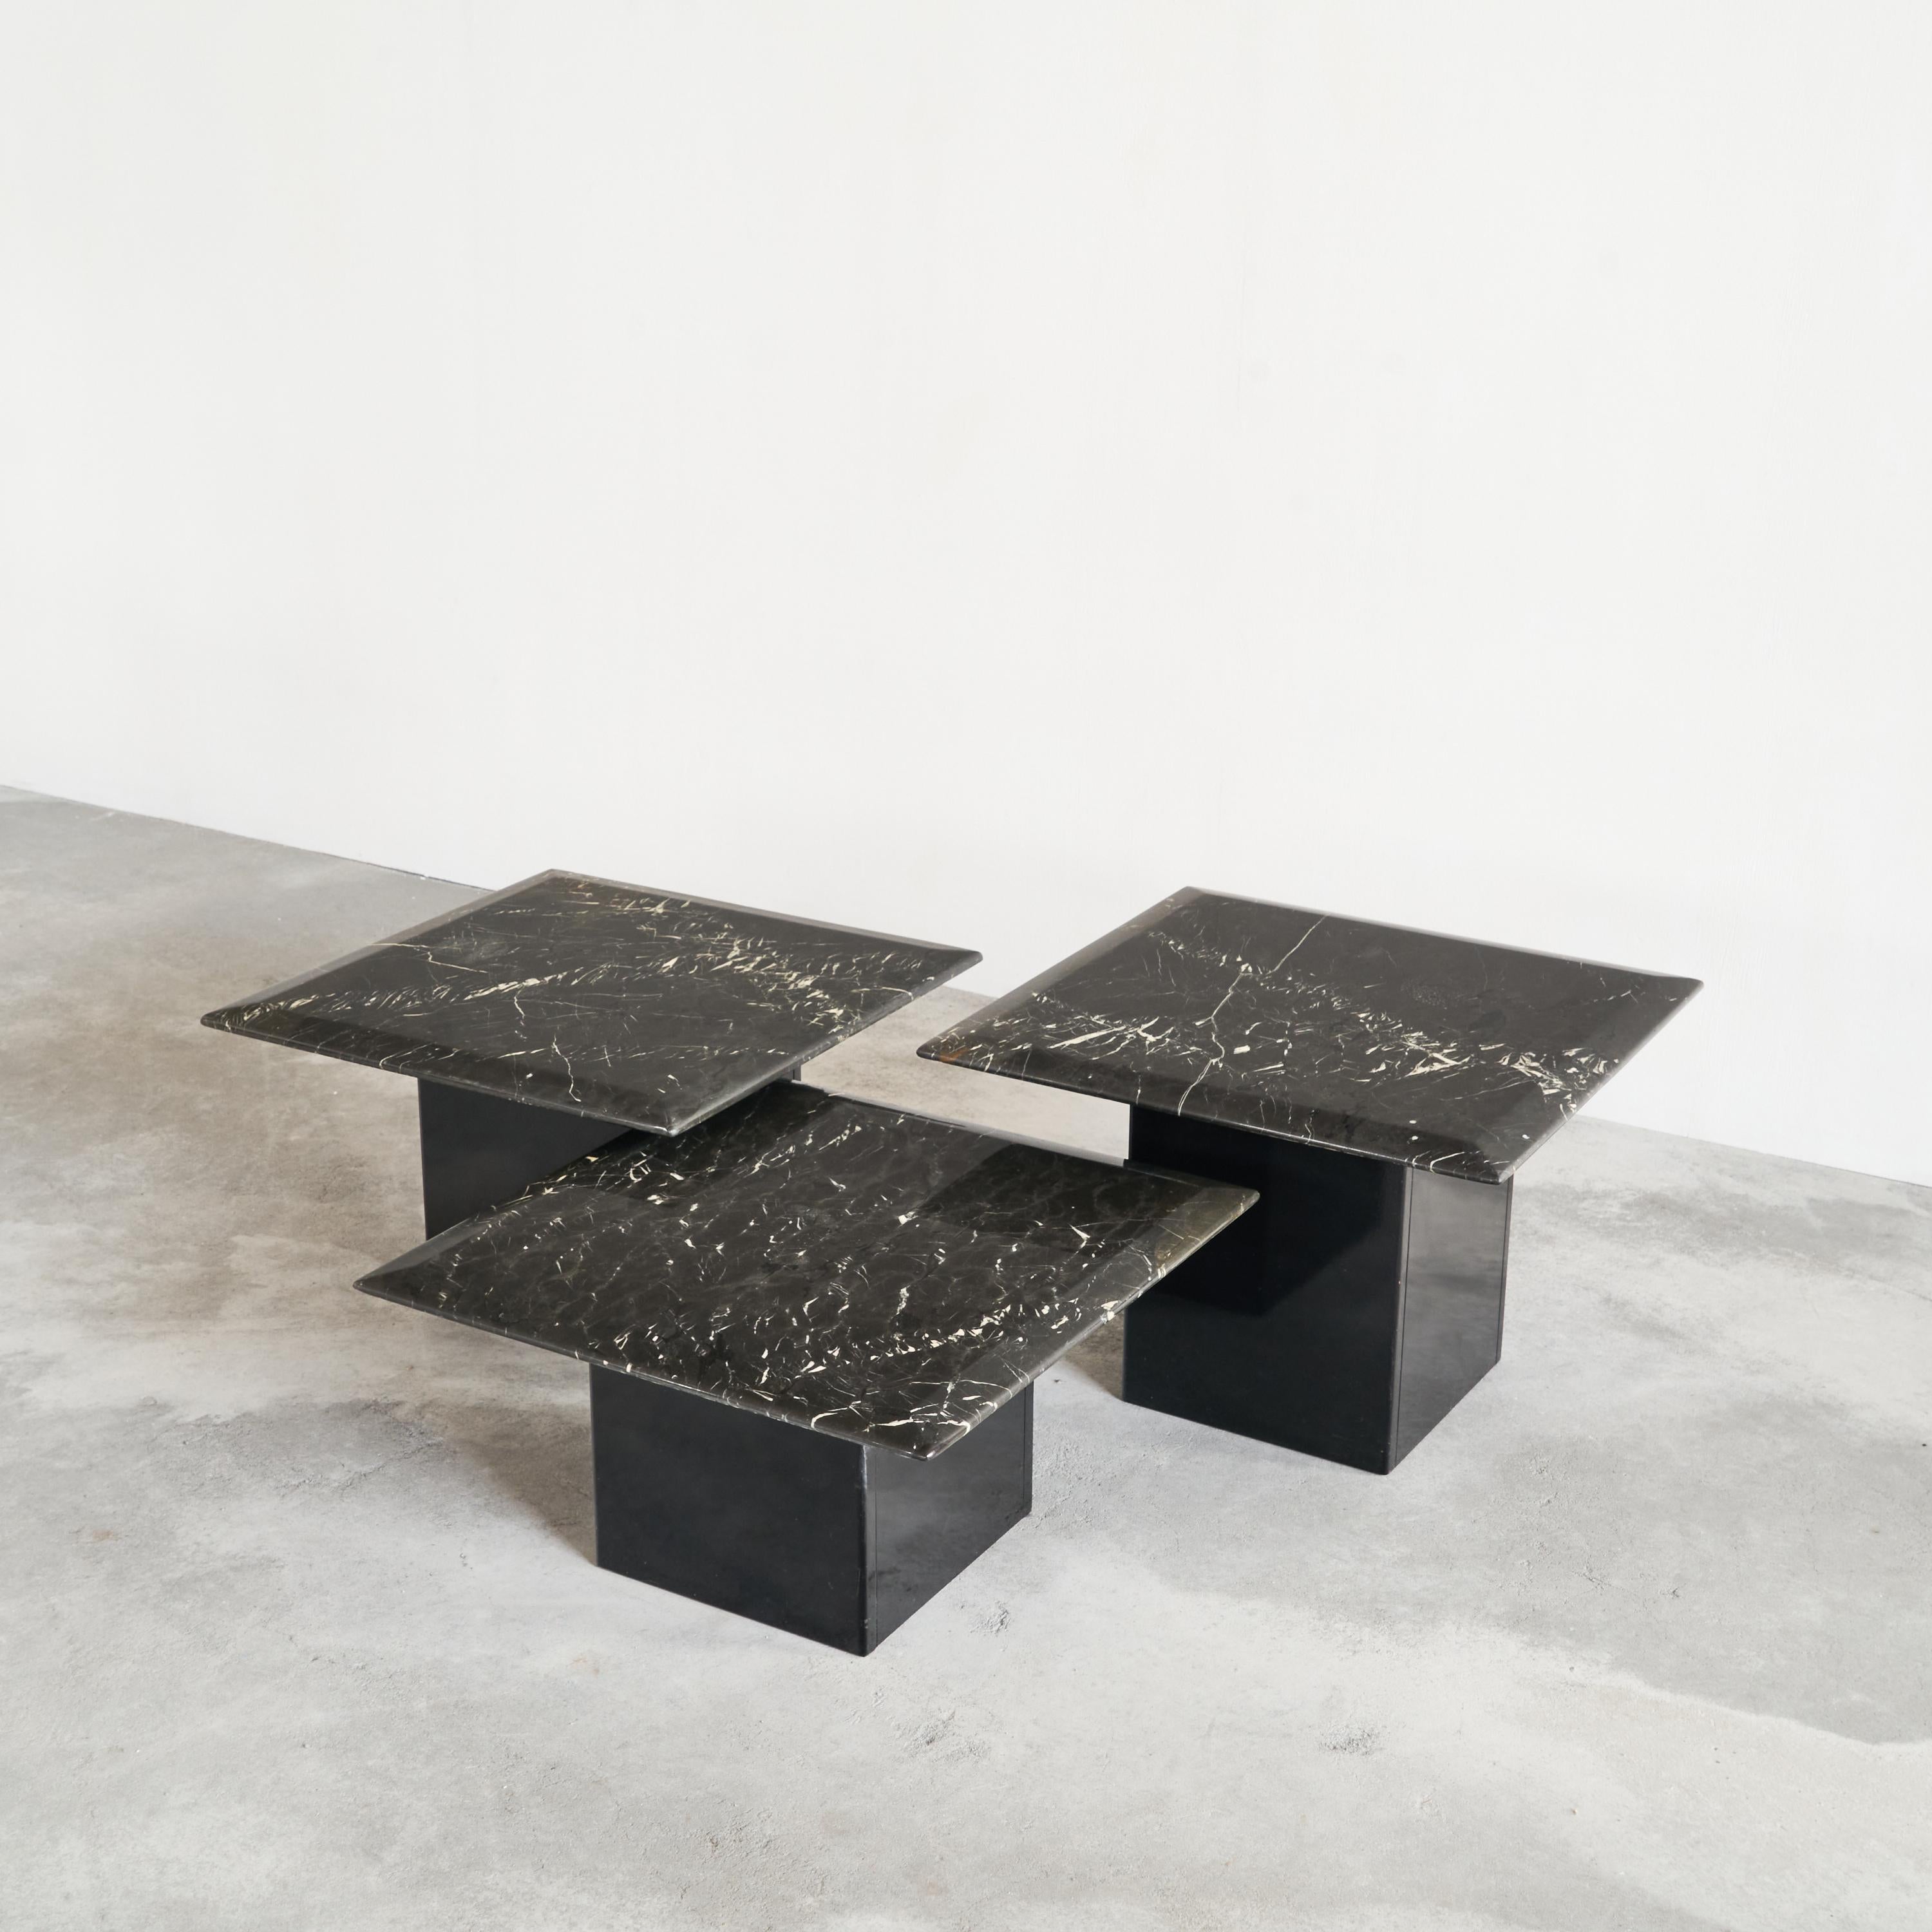 Set of 3 coffee or nesting tables in black marble and black lacquer, 1970s or 1980s.

This is a wonderful set of three coffee, side or nesting tables in expressive black marble with a black lacquered wooden base. They differ in height and